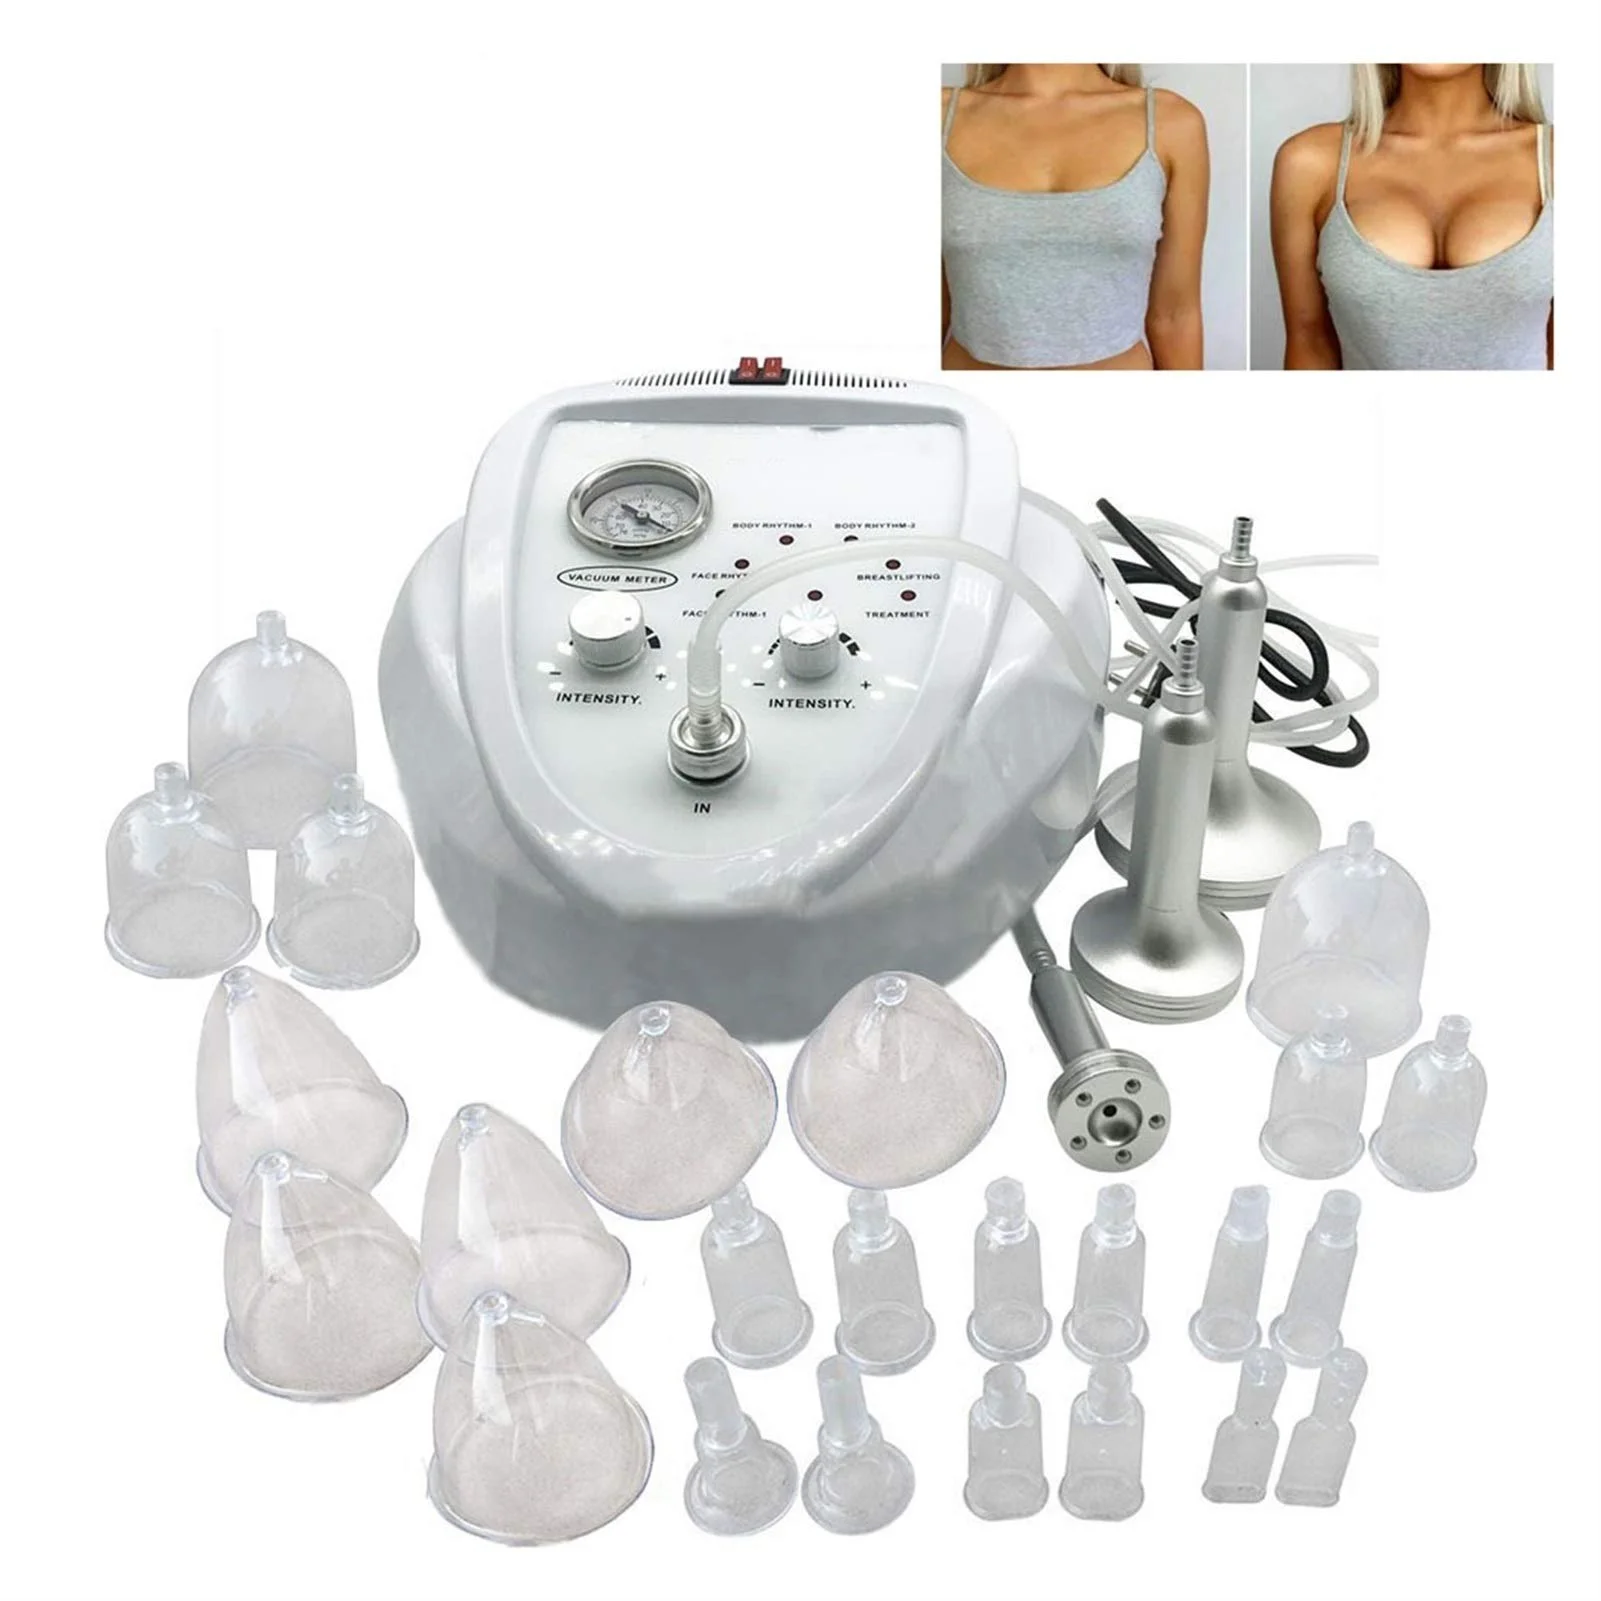 physical therapy equipments vacuum therapy machine Fat loss Massage/Slim SPA Breast enhancement Vacuum therapy (1600285159282)